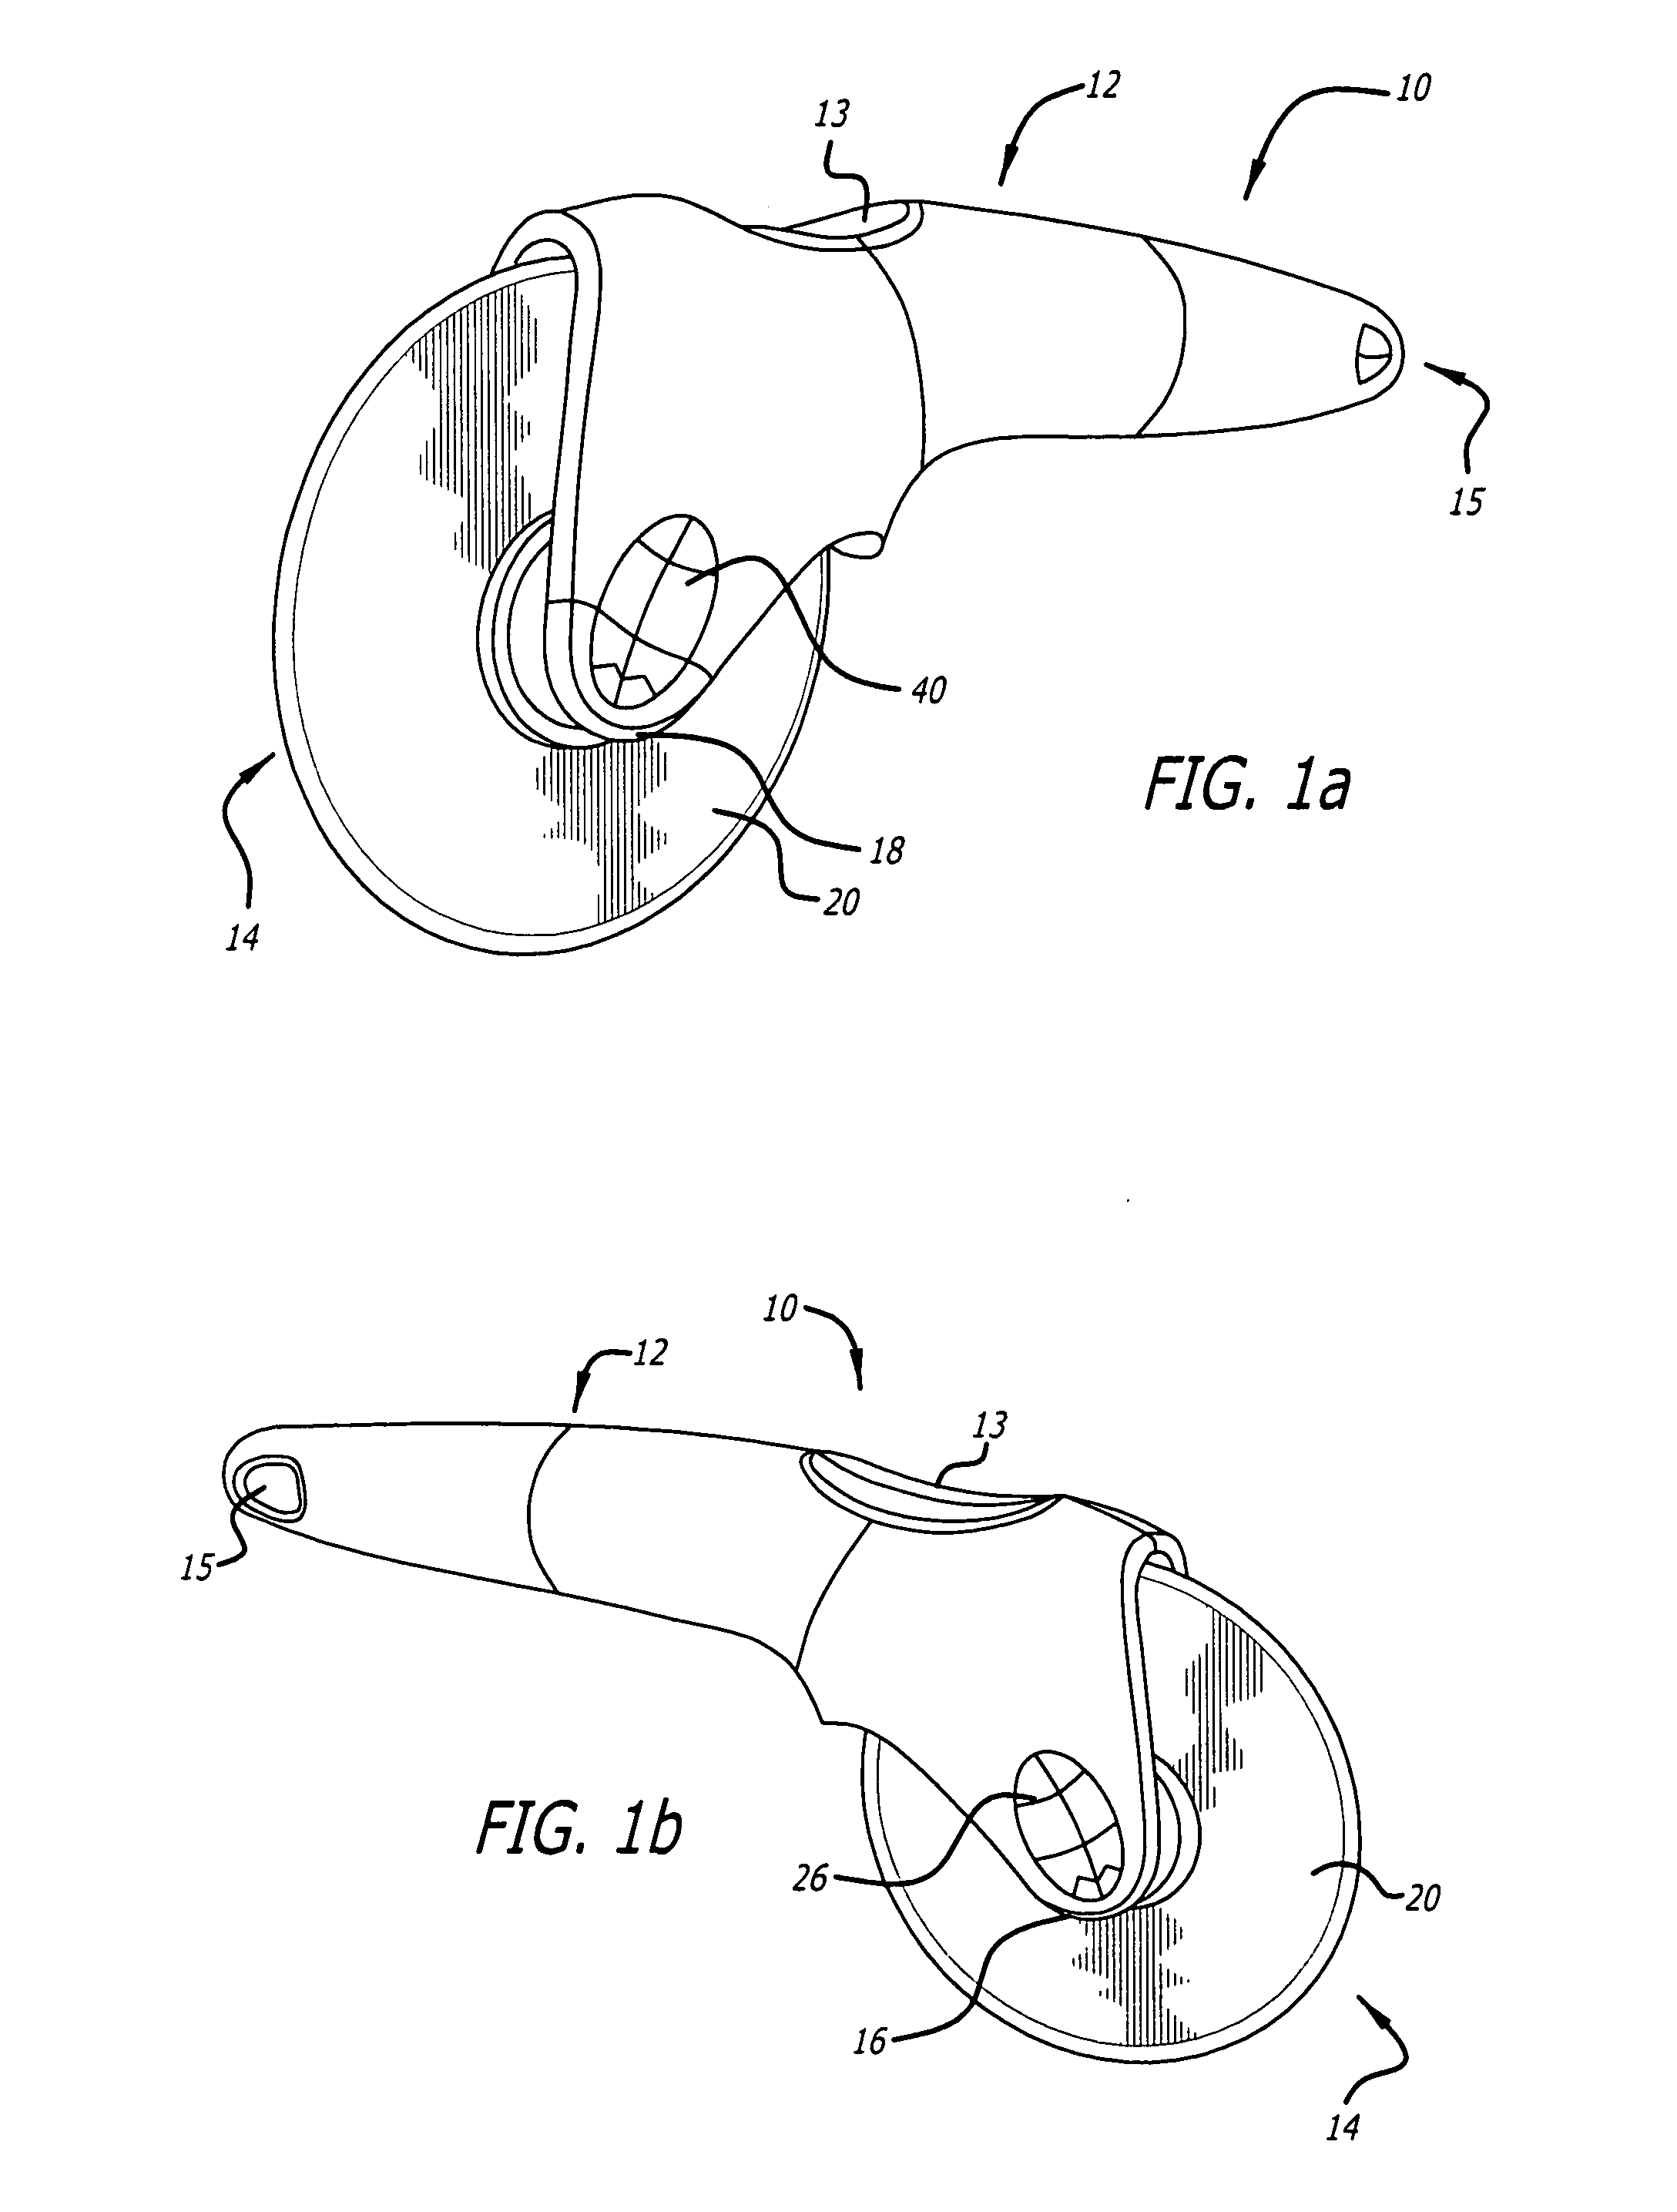 Rotary food cutter with removable blade assembly